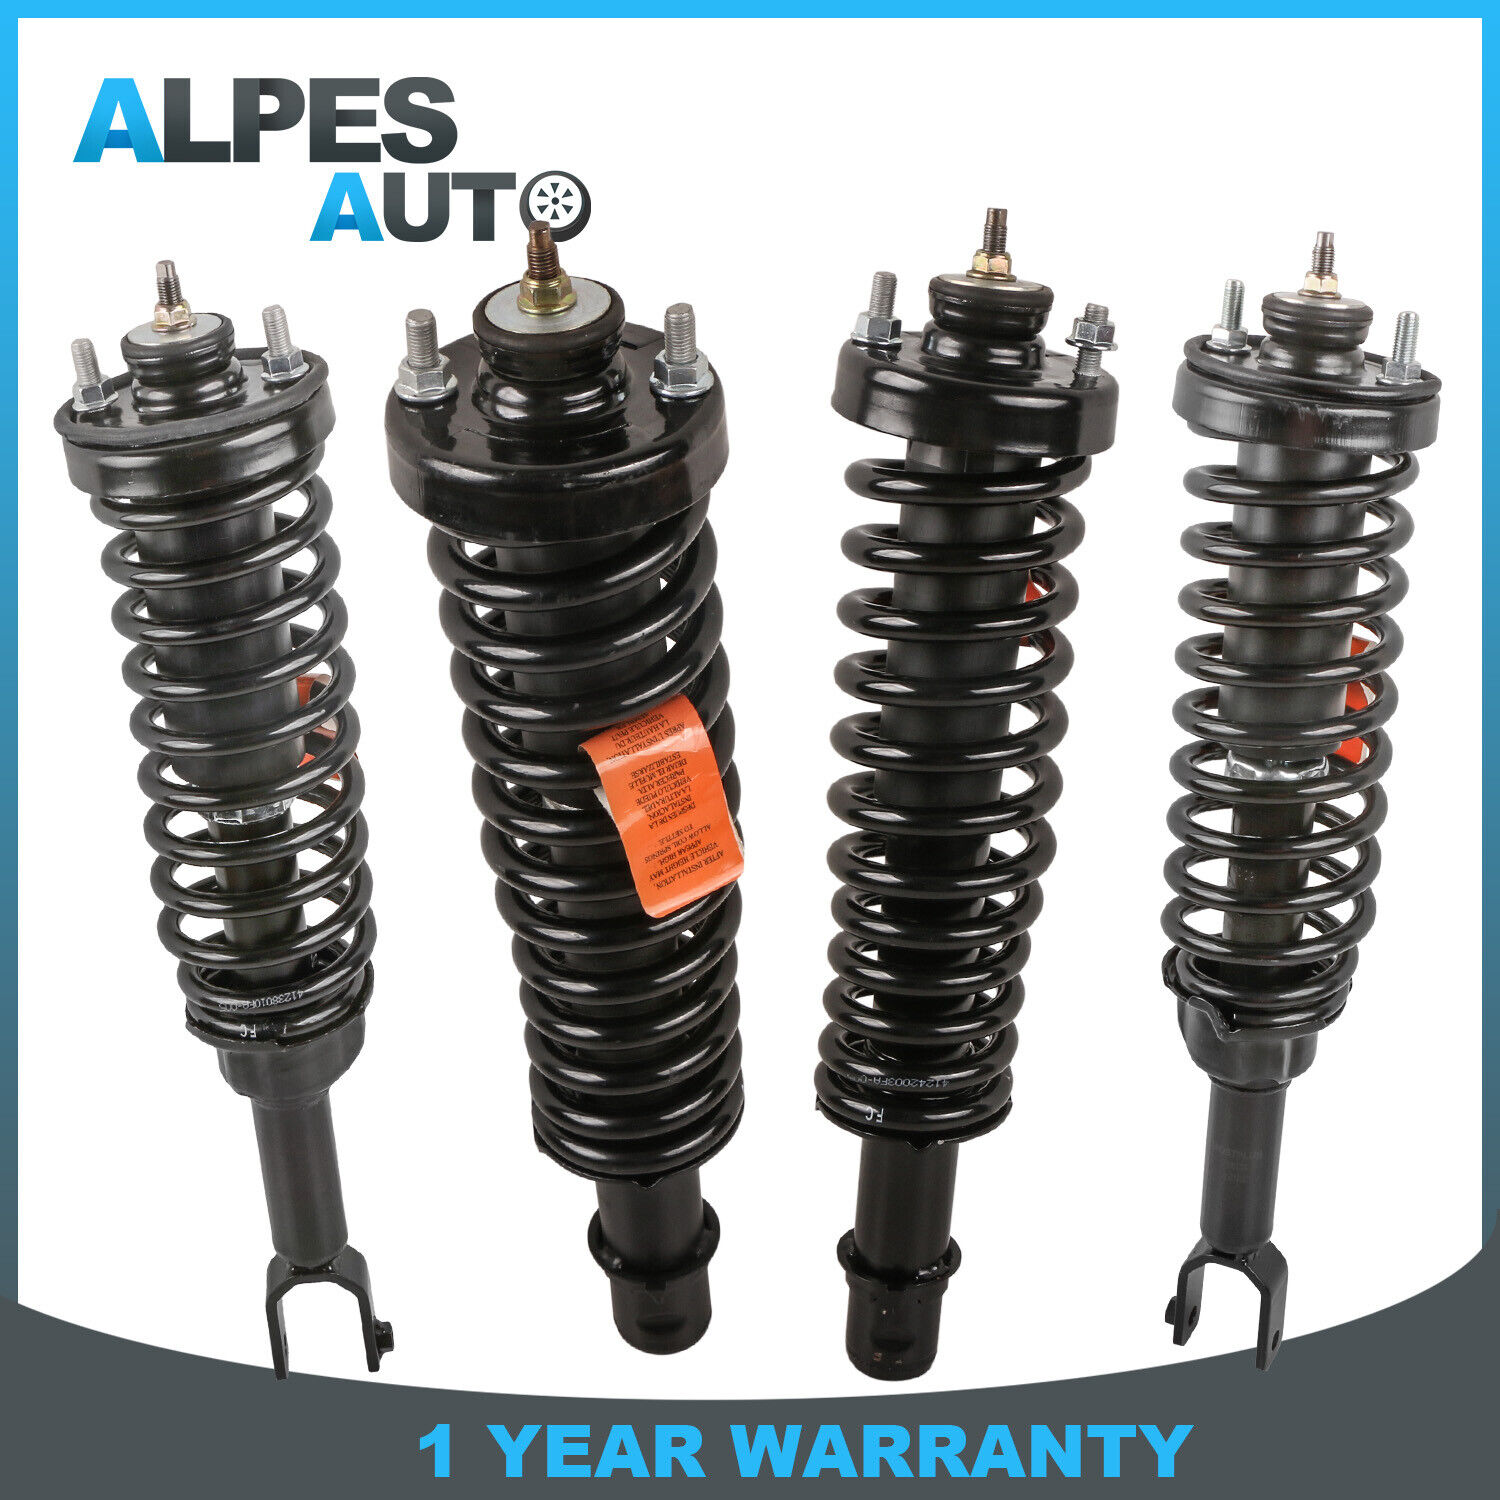 2x Front Shock +2x Rear Shock Absorbers For 96-00 Honda Civic 97-00 Acura EL